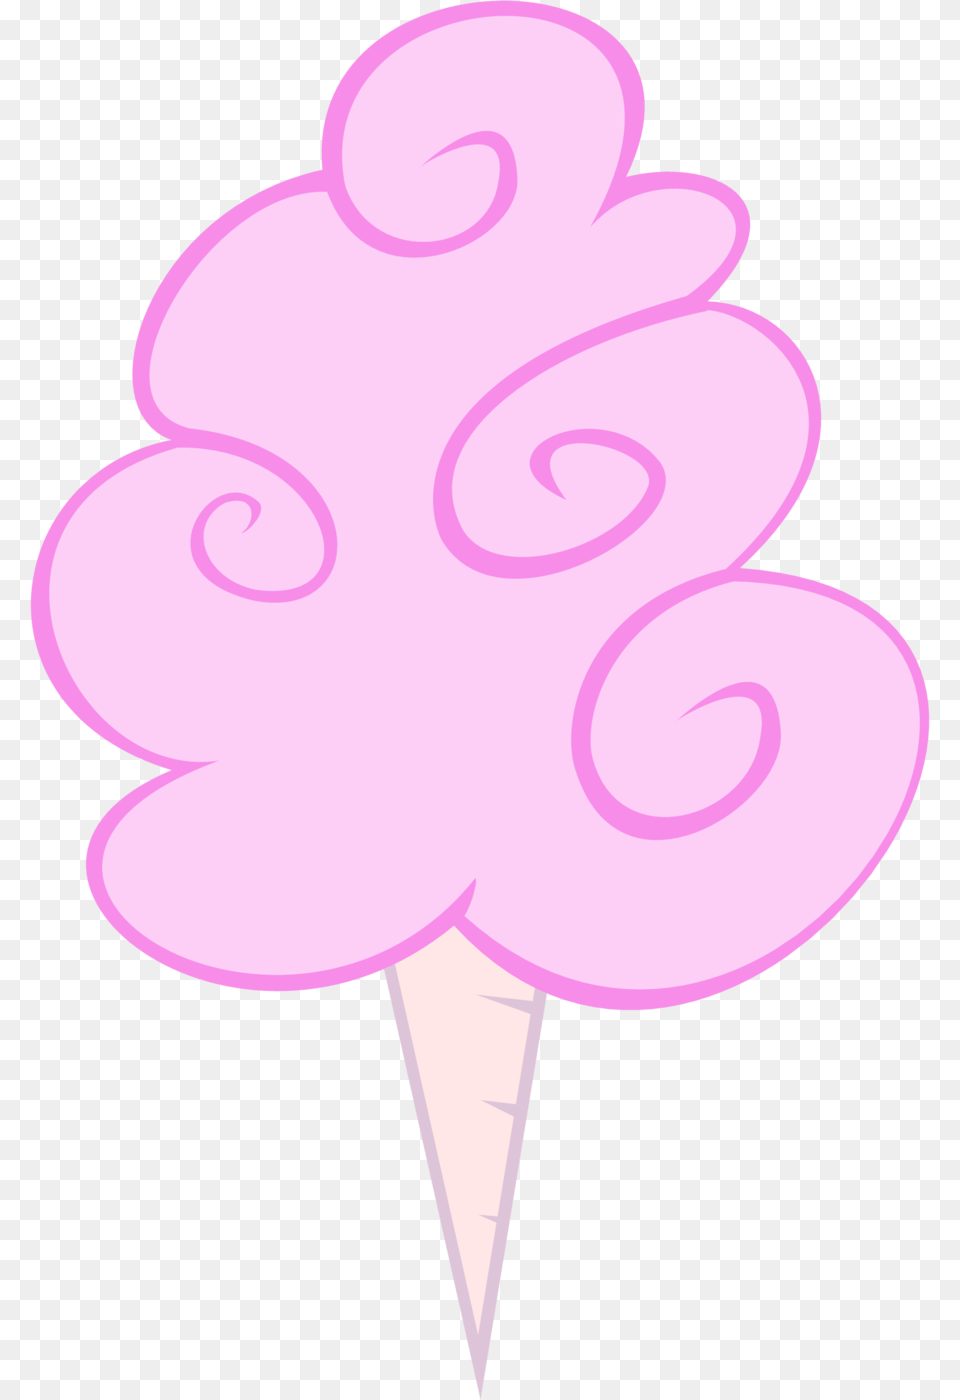 Cotton Candy Cute, Food, Sweets, Cream, Dessert Png Image